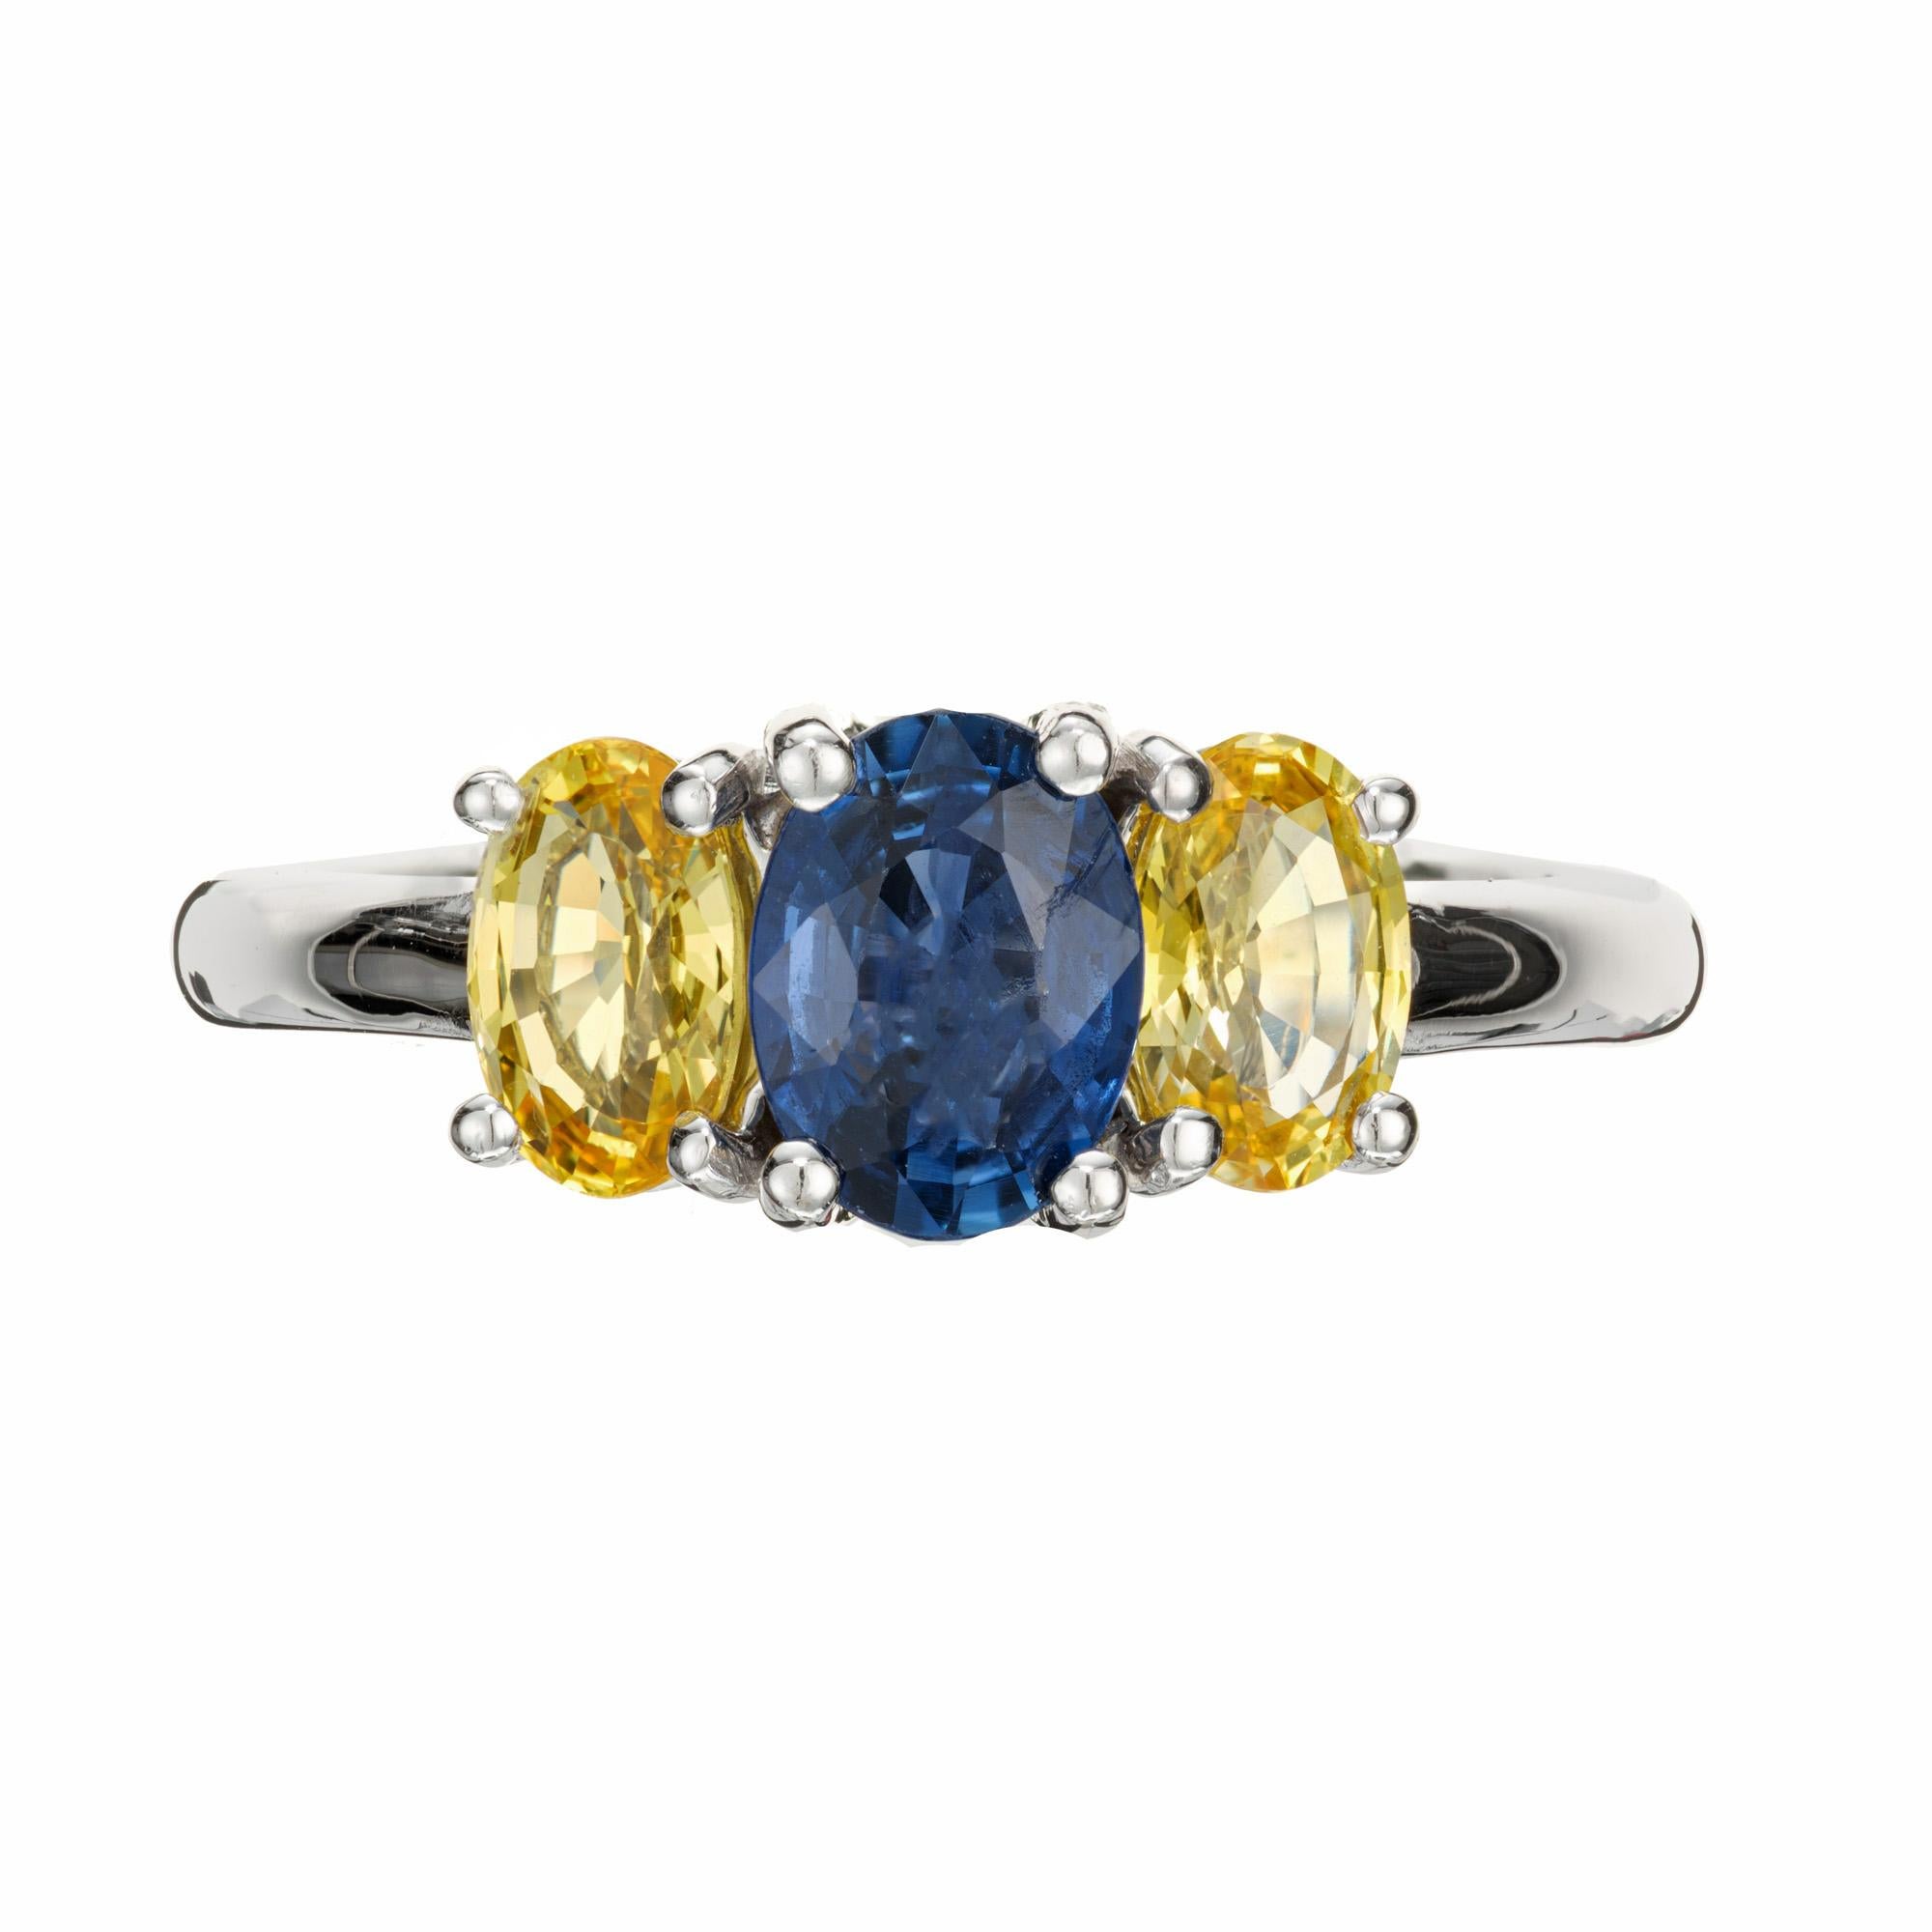 Sapphire engagement ring. 1.00ct Oval blue sapphire center stone with 2 oval yellow side sapphires in a simple three-stone 18k white gold setting. Created in the Peter Suchy workshop. 

1 oval blue sapphire approx. total weight 1.00cts.
2 oval